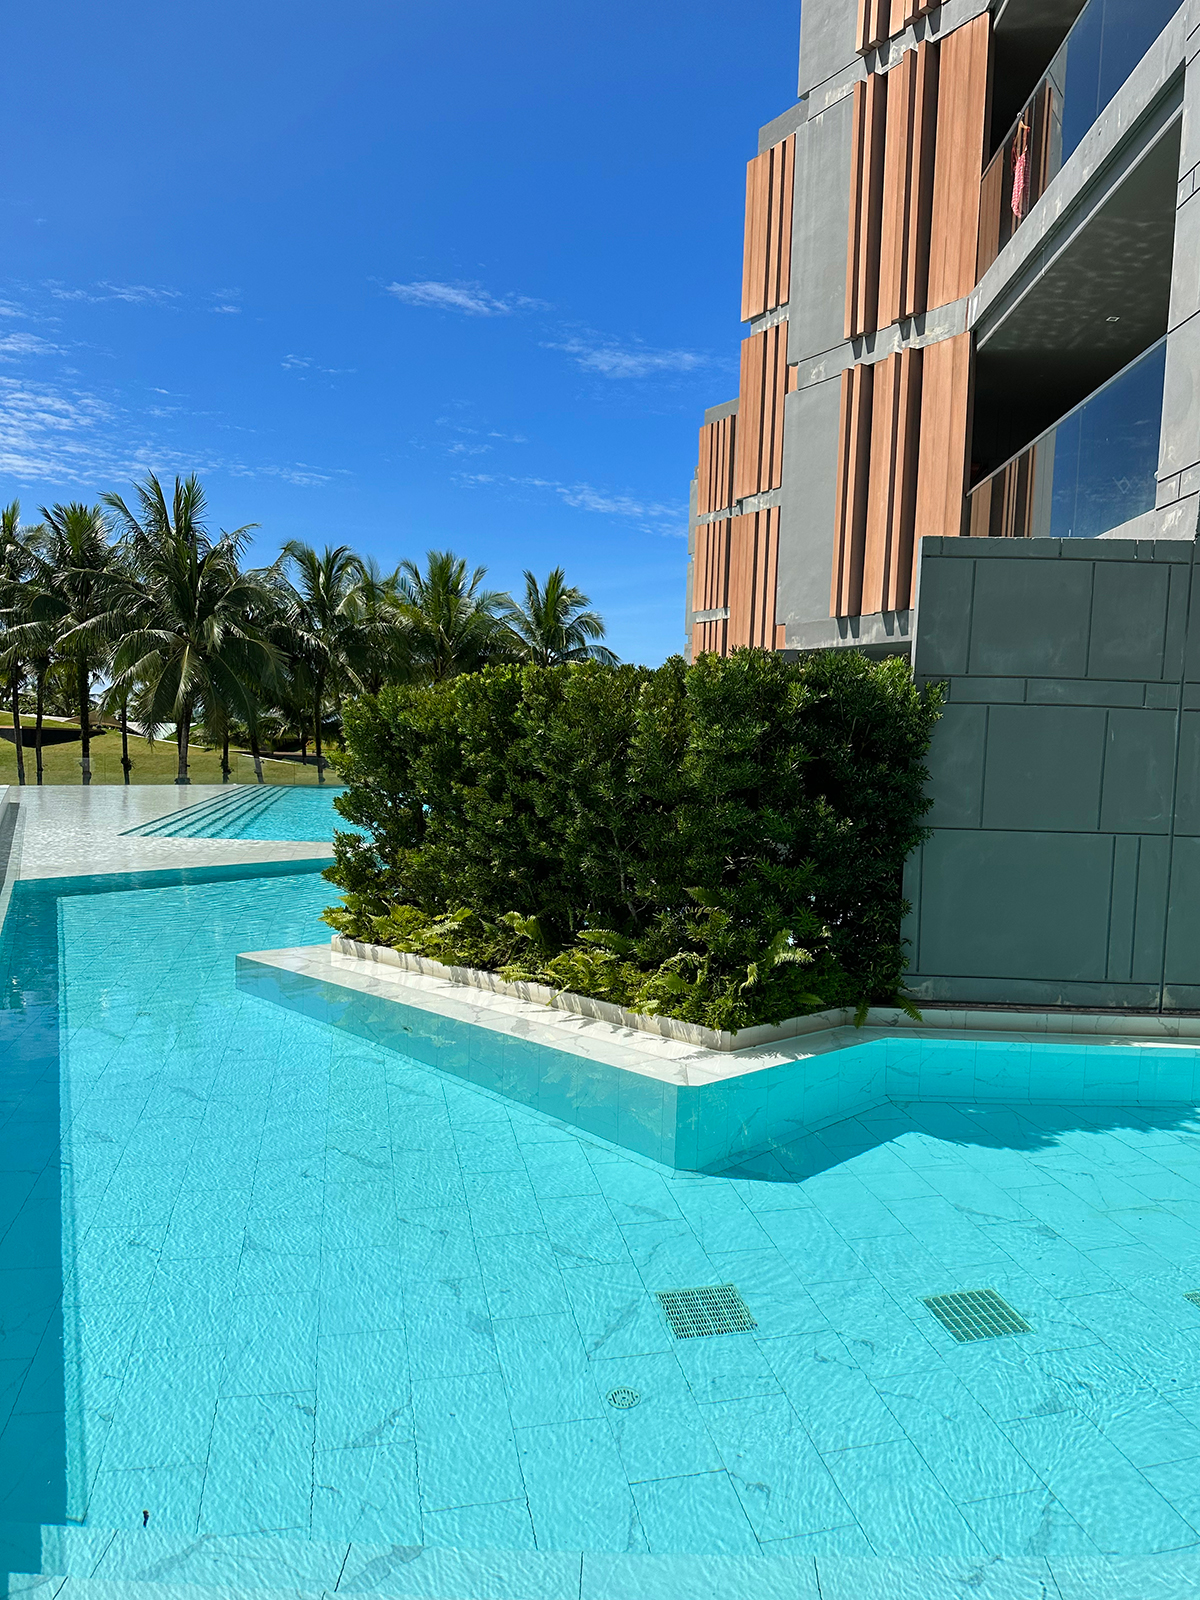 khao lak hotels pool and side of building